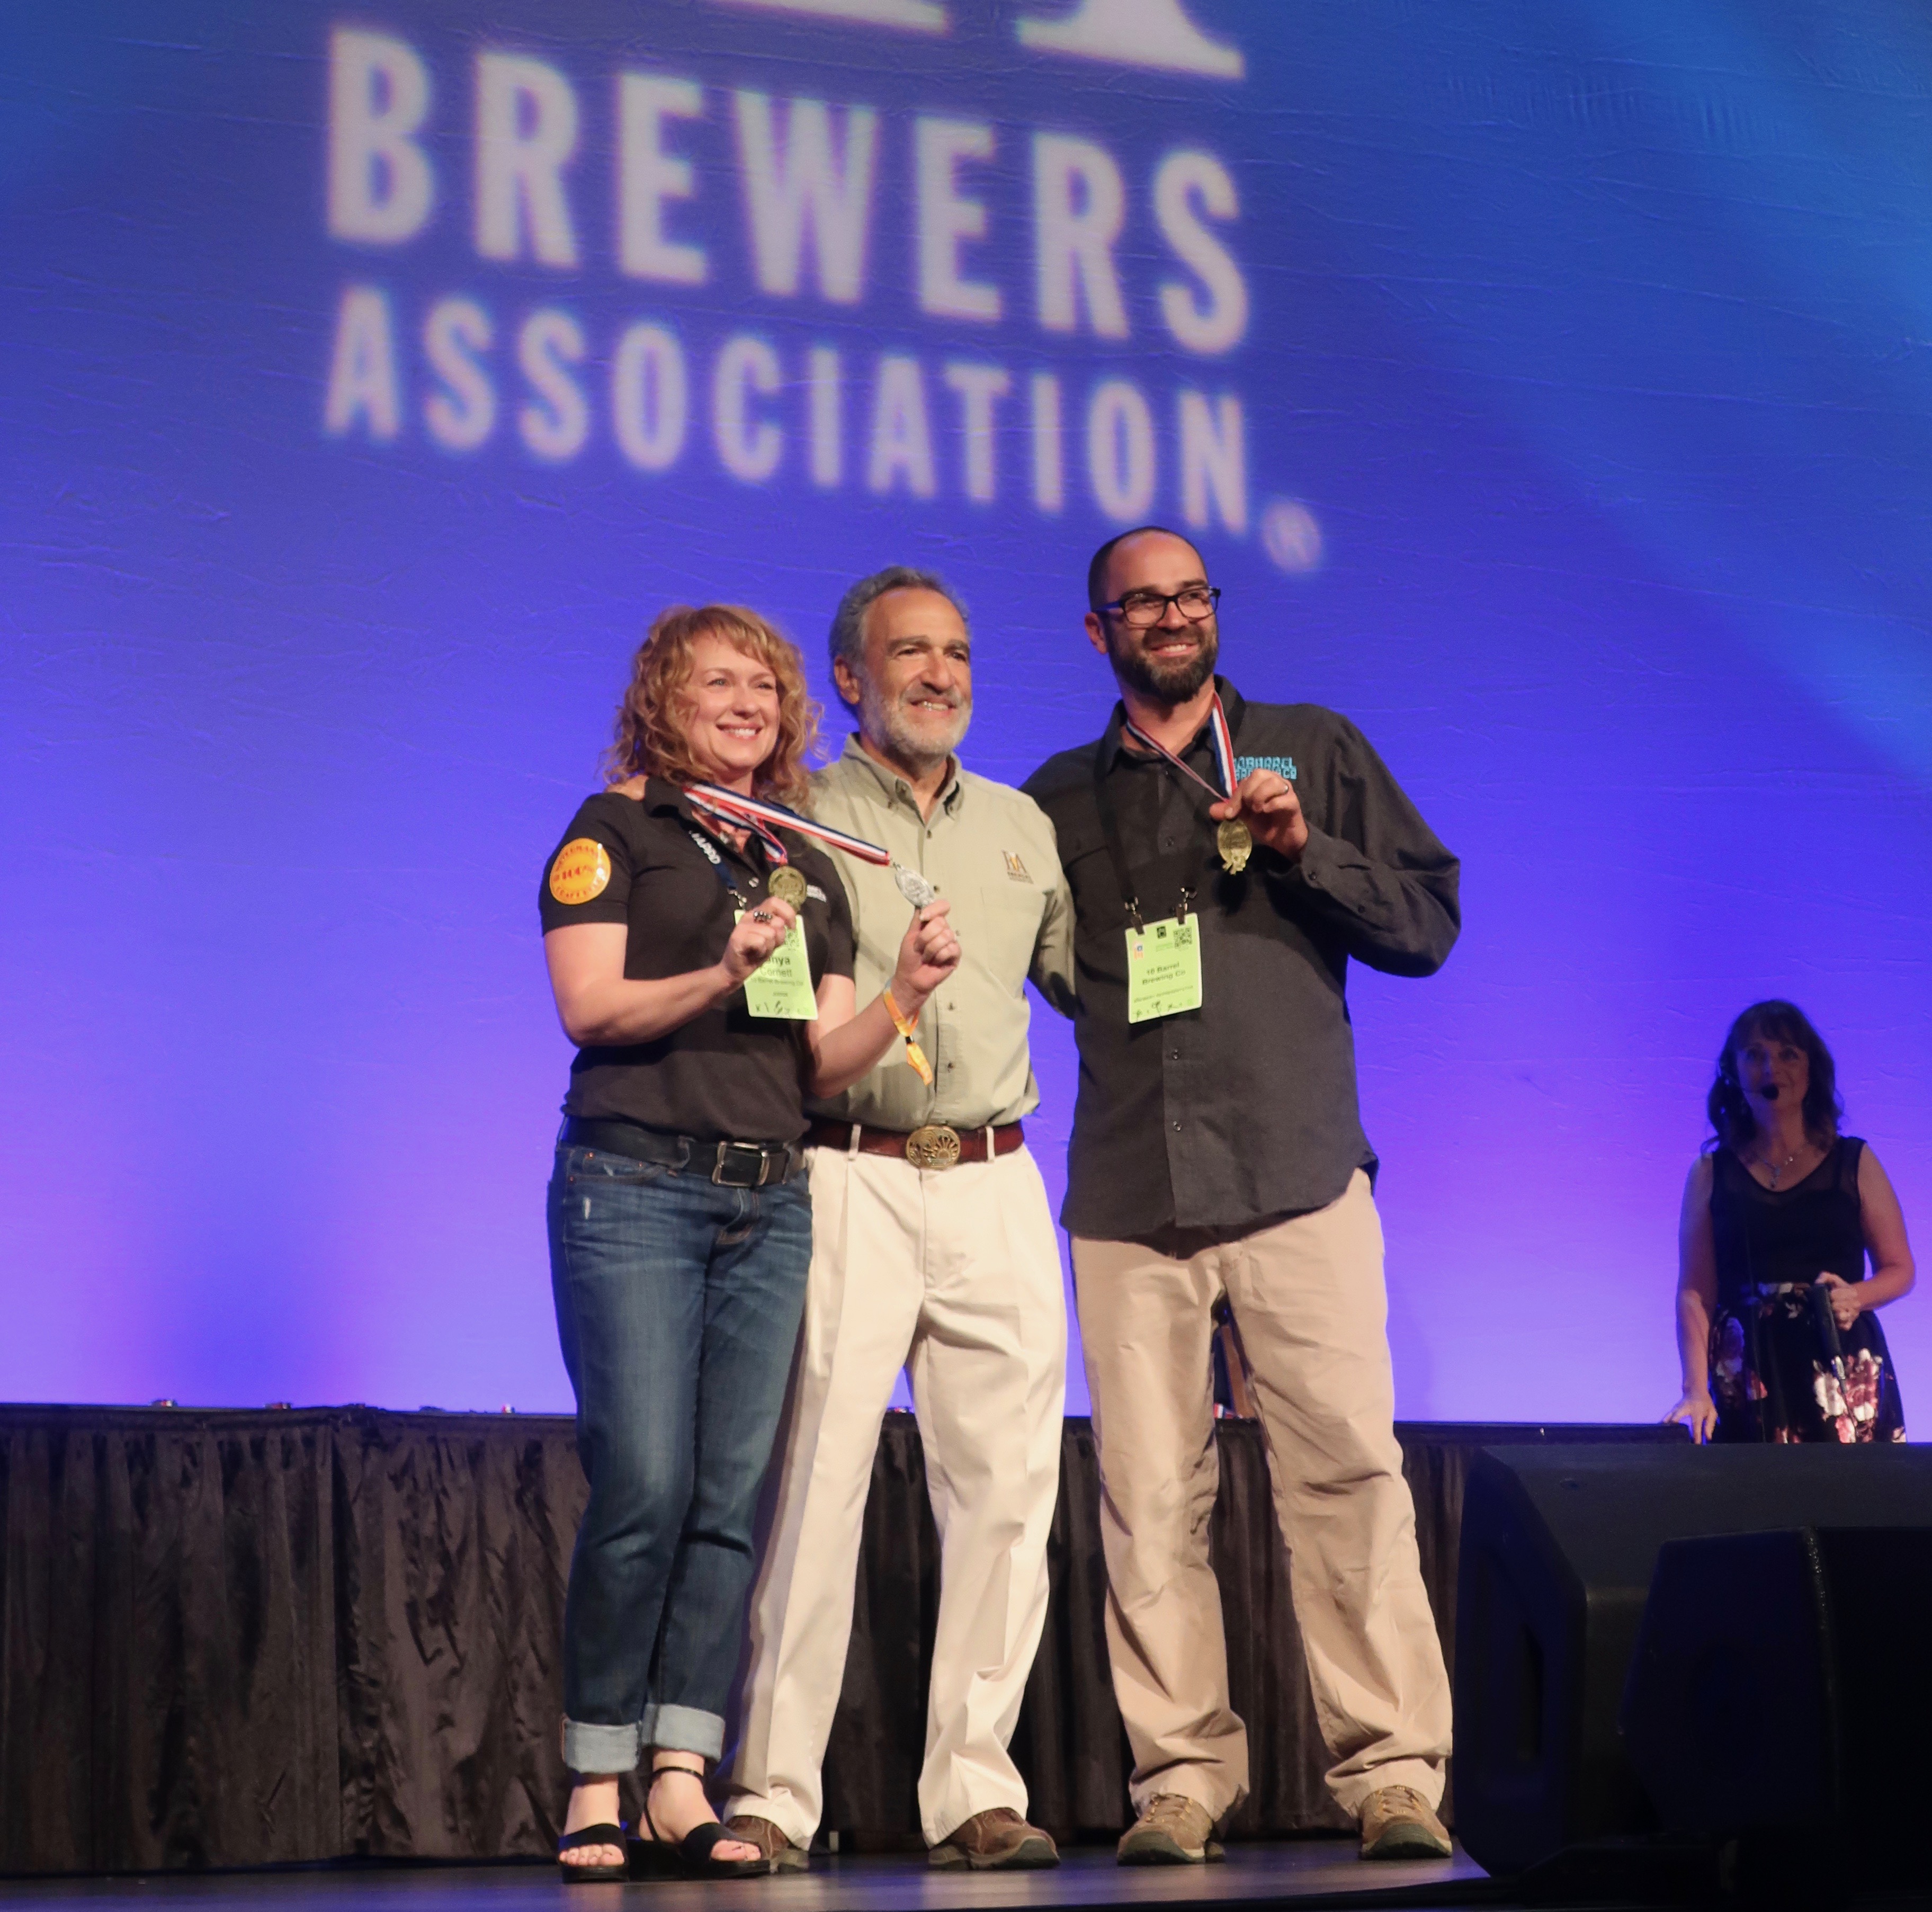 Tonya Cornett and Ian Larkin of 10 Barrel Brewing on stage for their 3rd GABF Medal at the 2018 Great American Beer Festival.